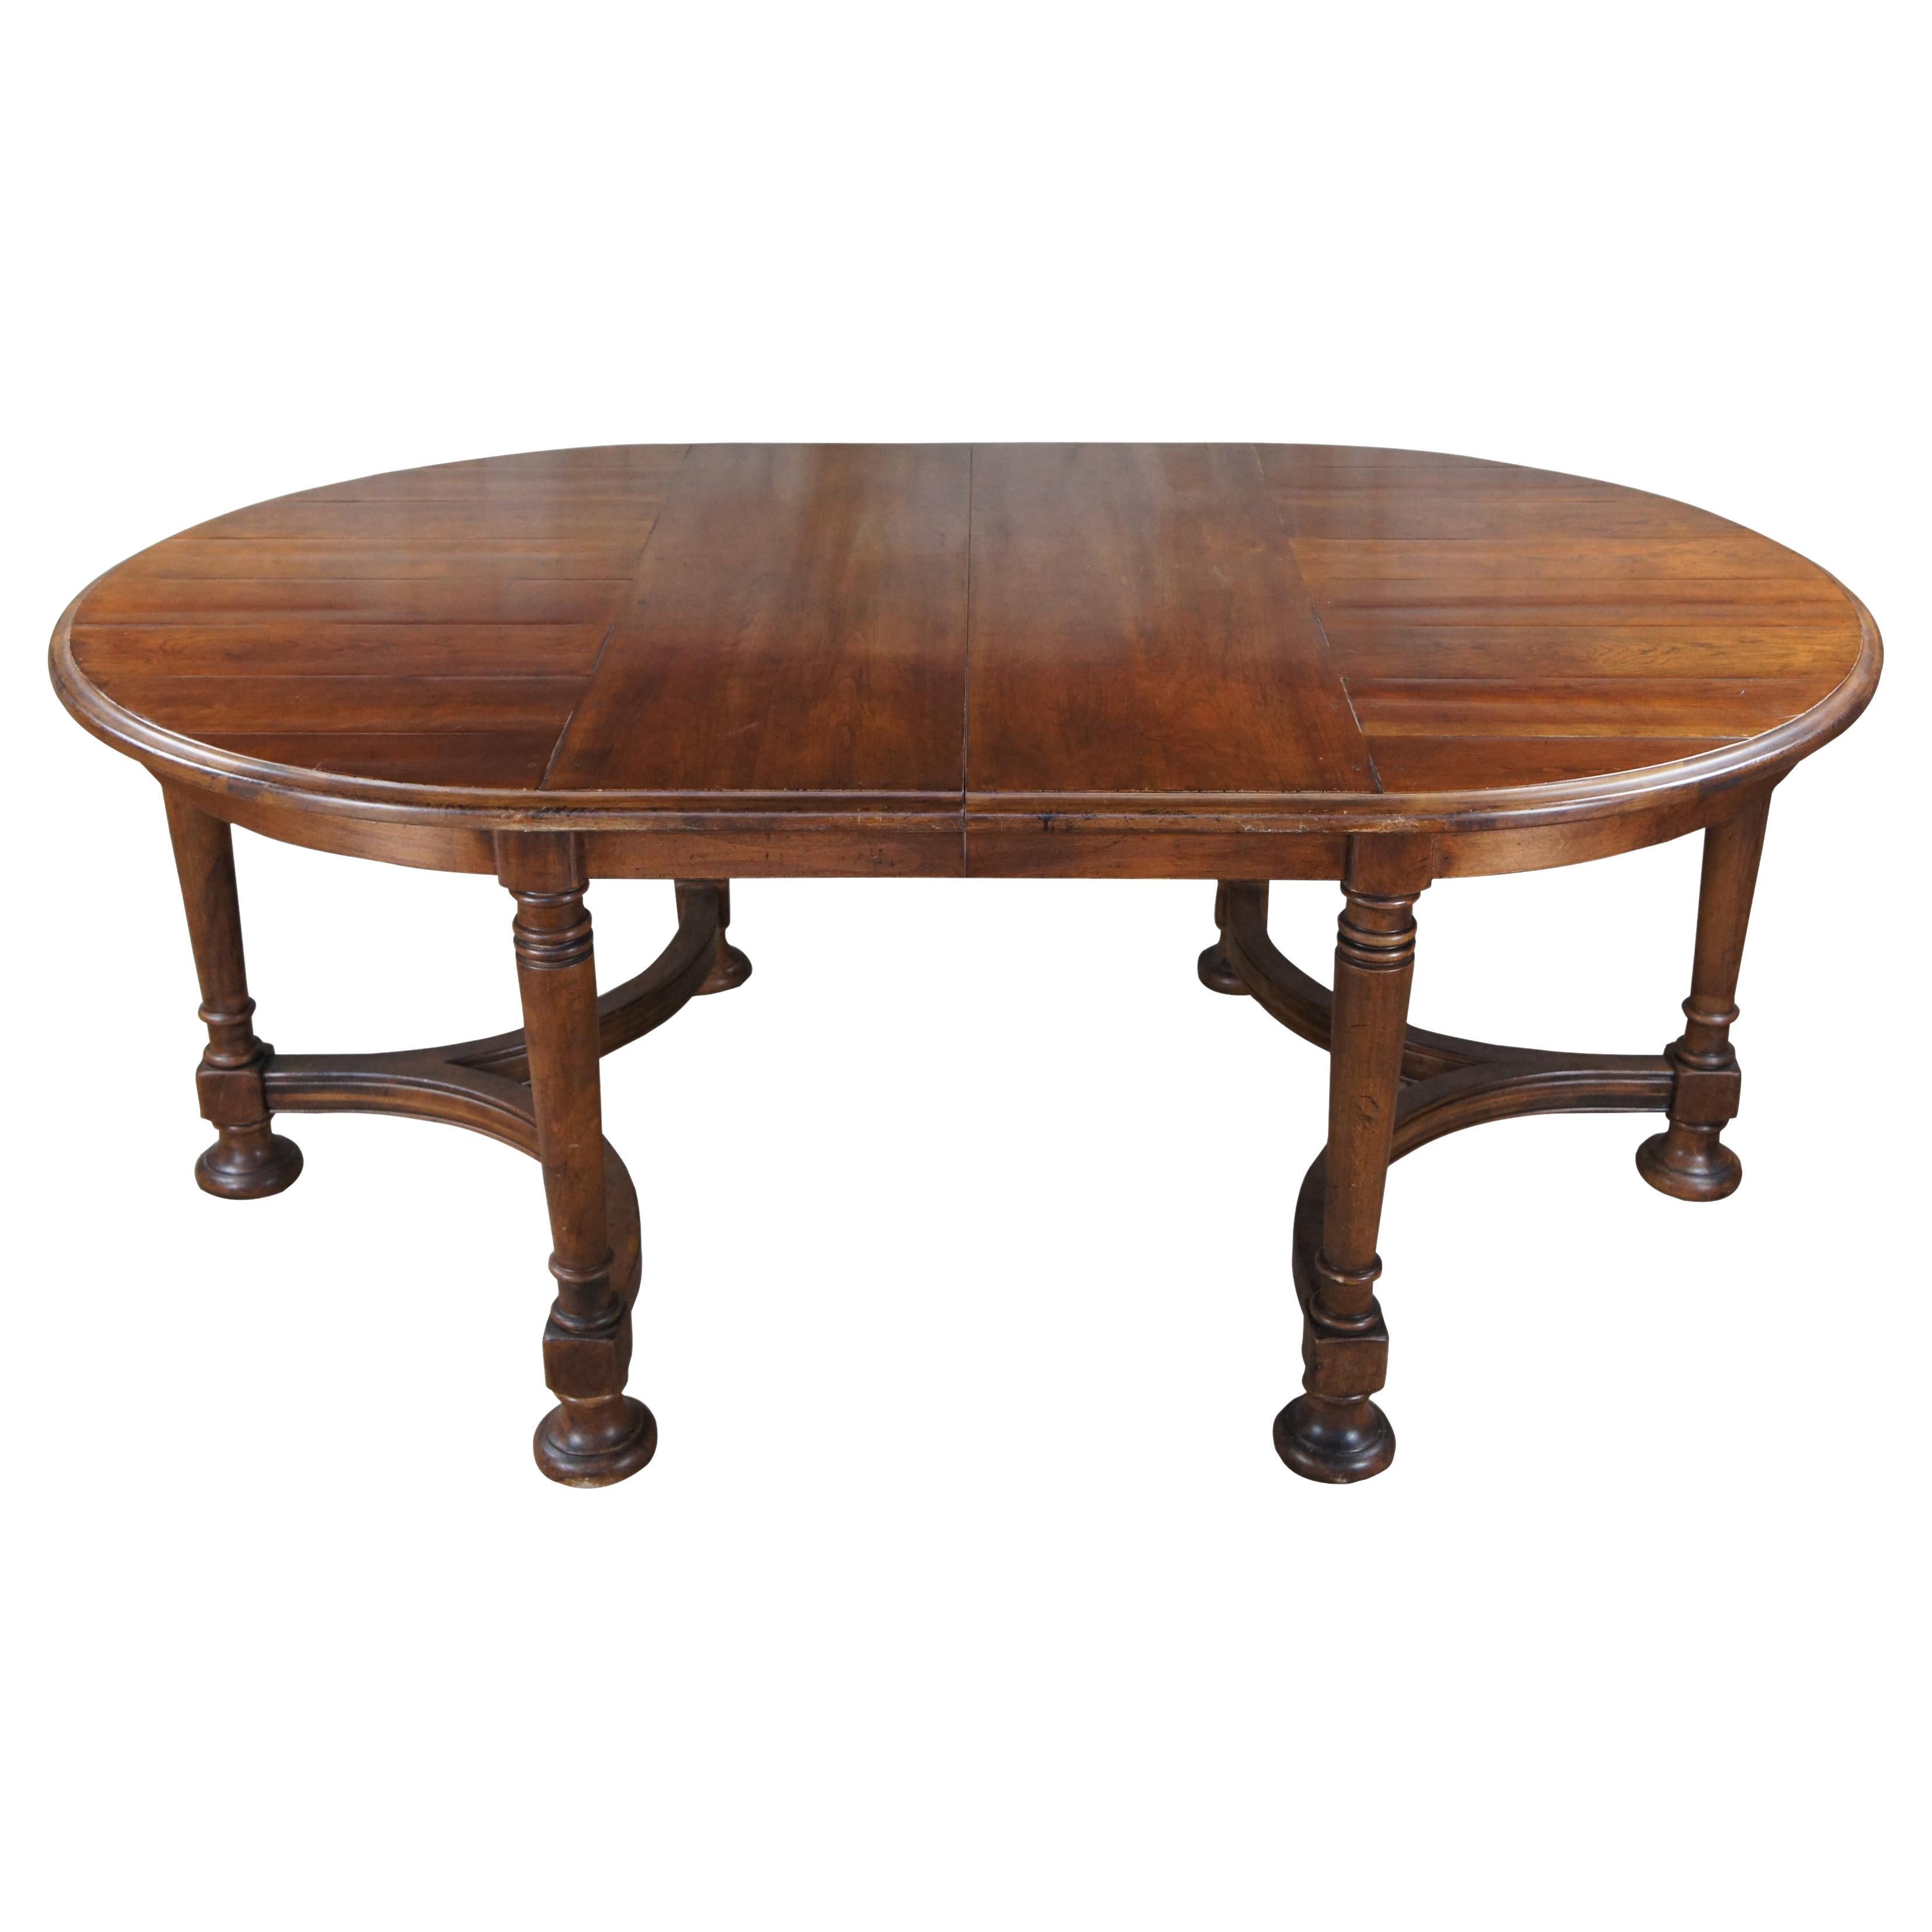 Vintage Drexel Heritage Cherry Touraine III Old World Tuscan Dining Table 100" For Sale